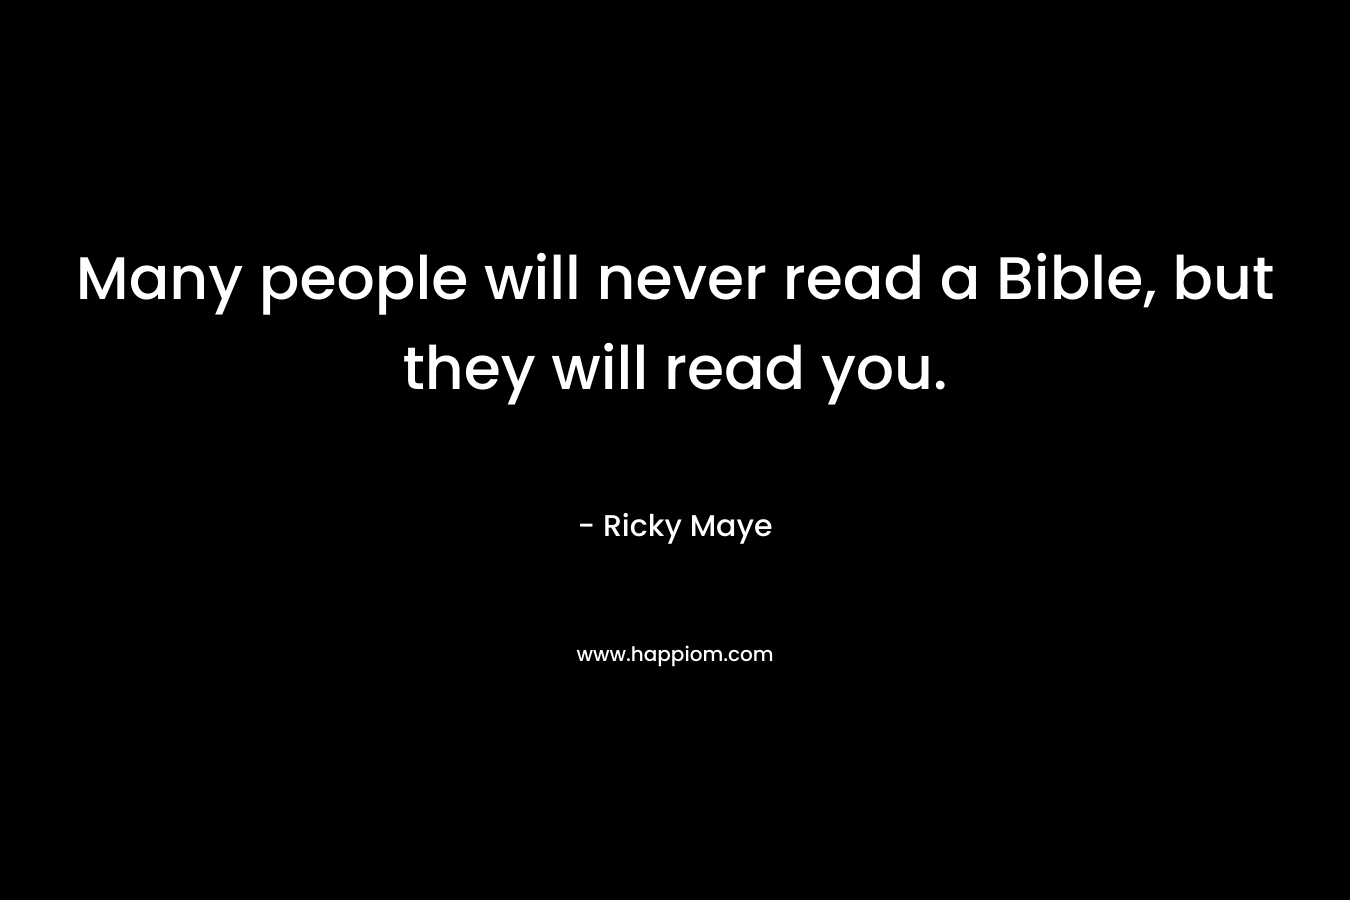 Many people will never read a Bible, but they will read you. – Ricky Maye